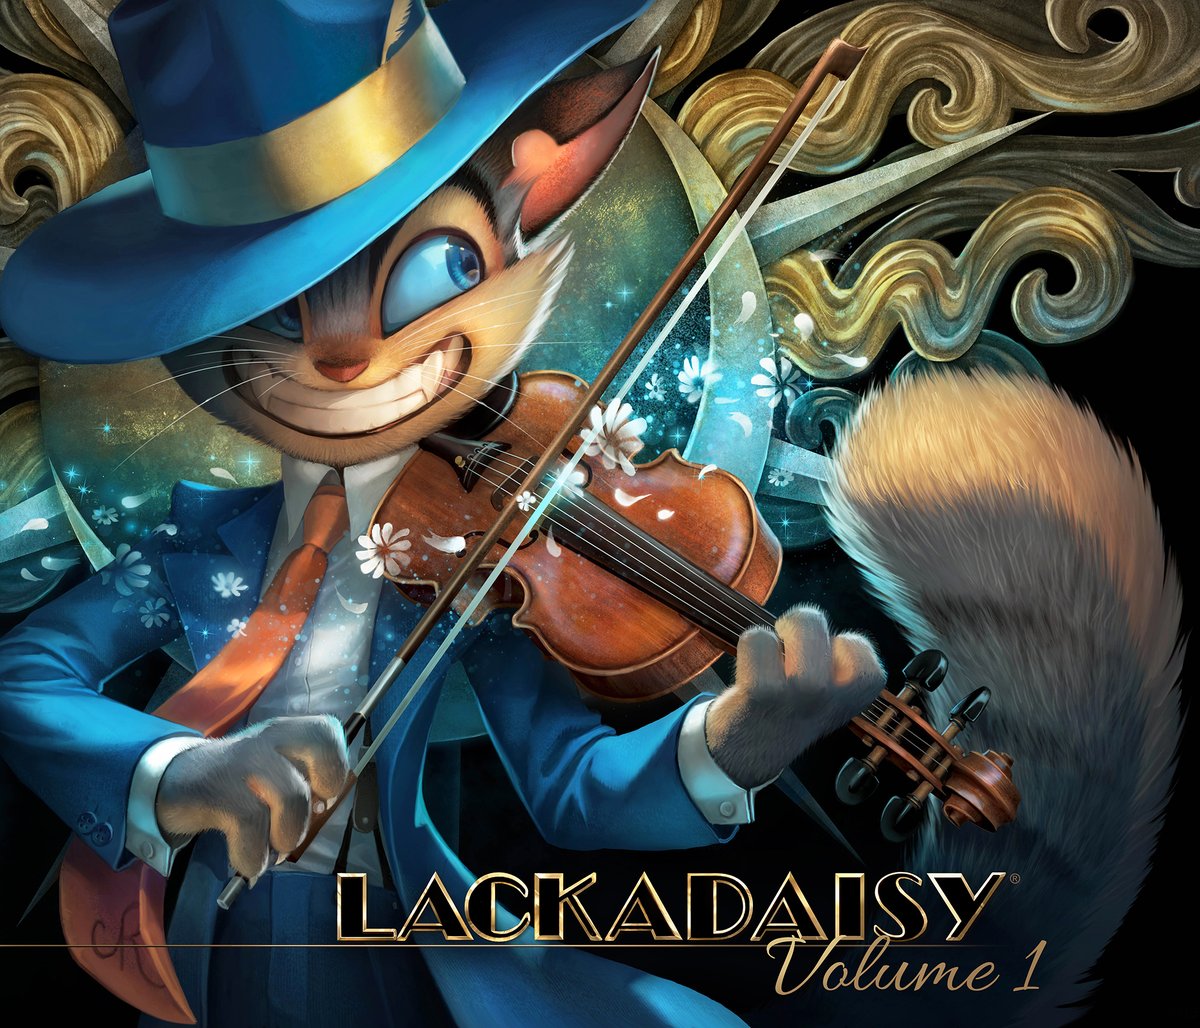 The Lackadaisy Volume 1 Hardcover book is now up for pre-order! a.co/d/f8Sfzyz